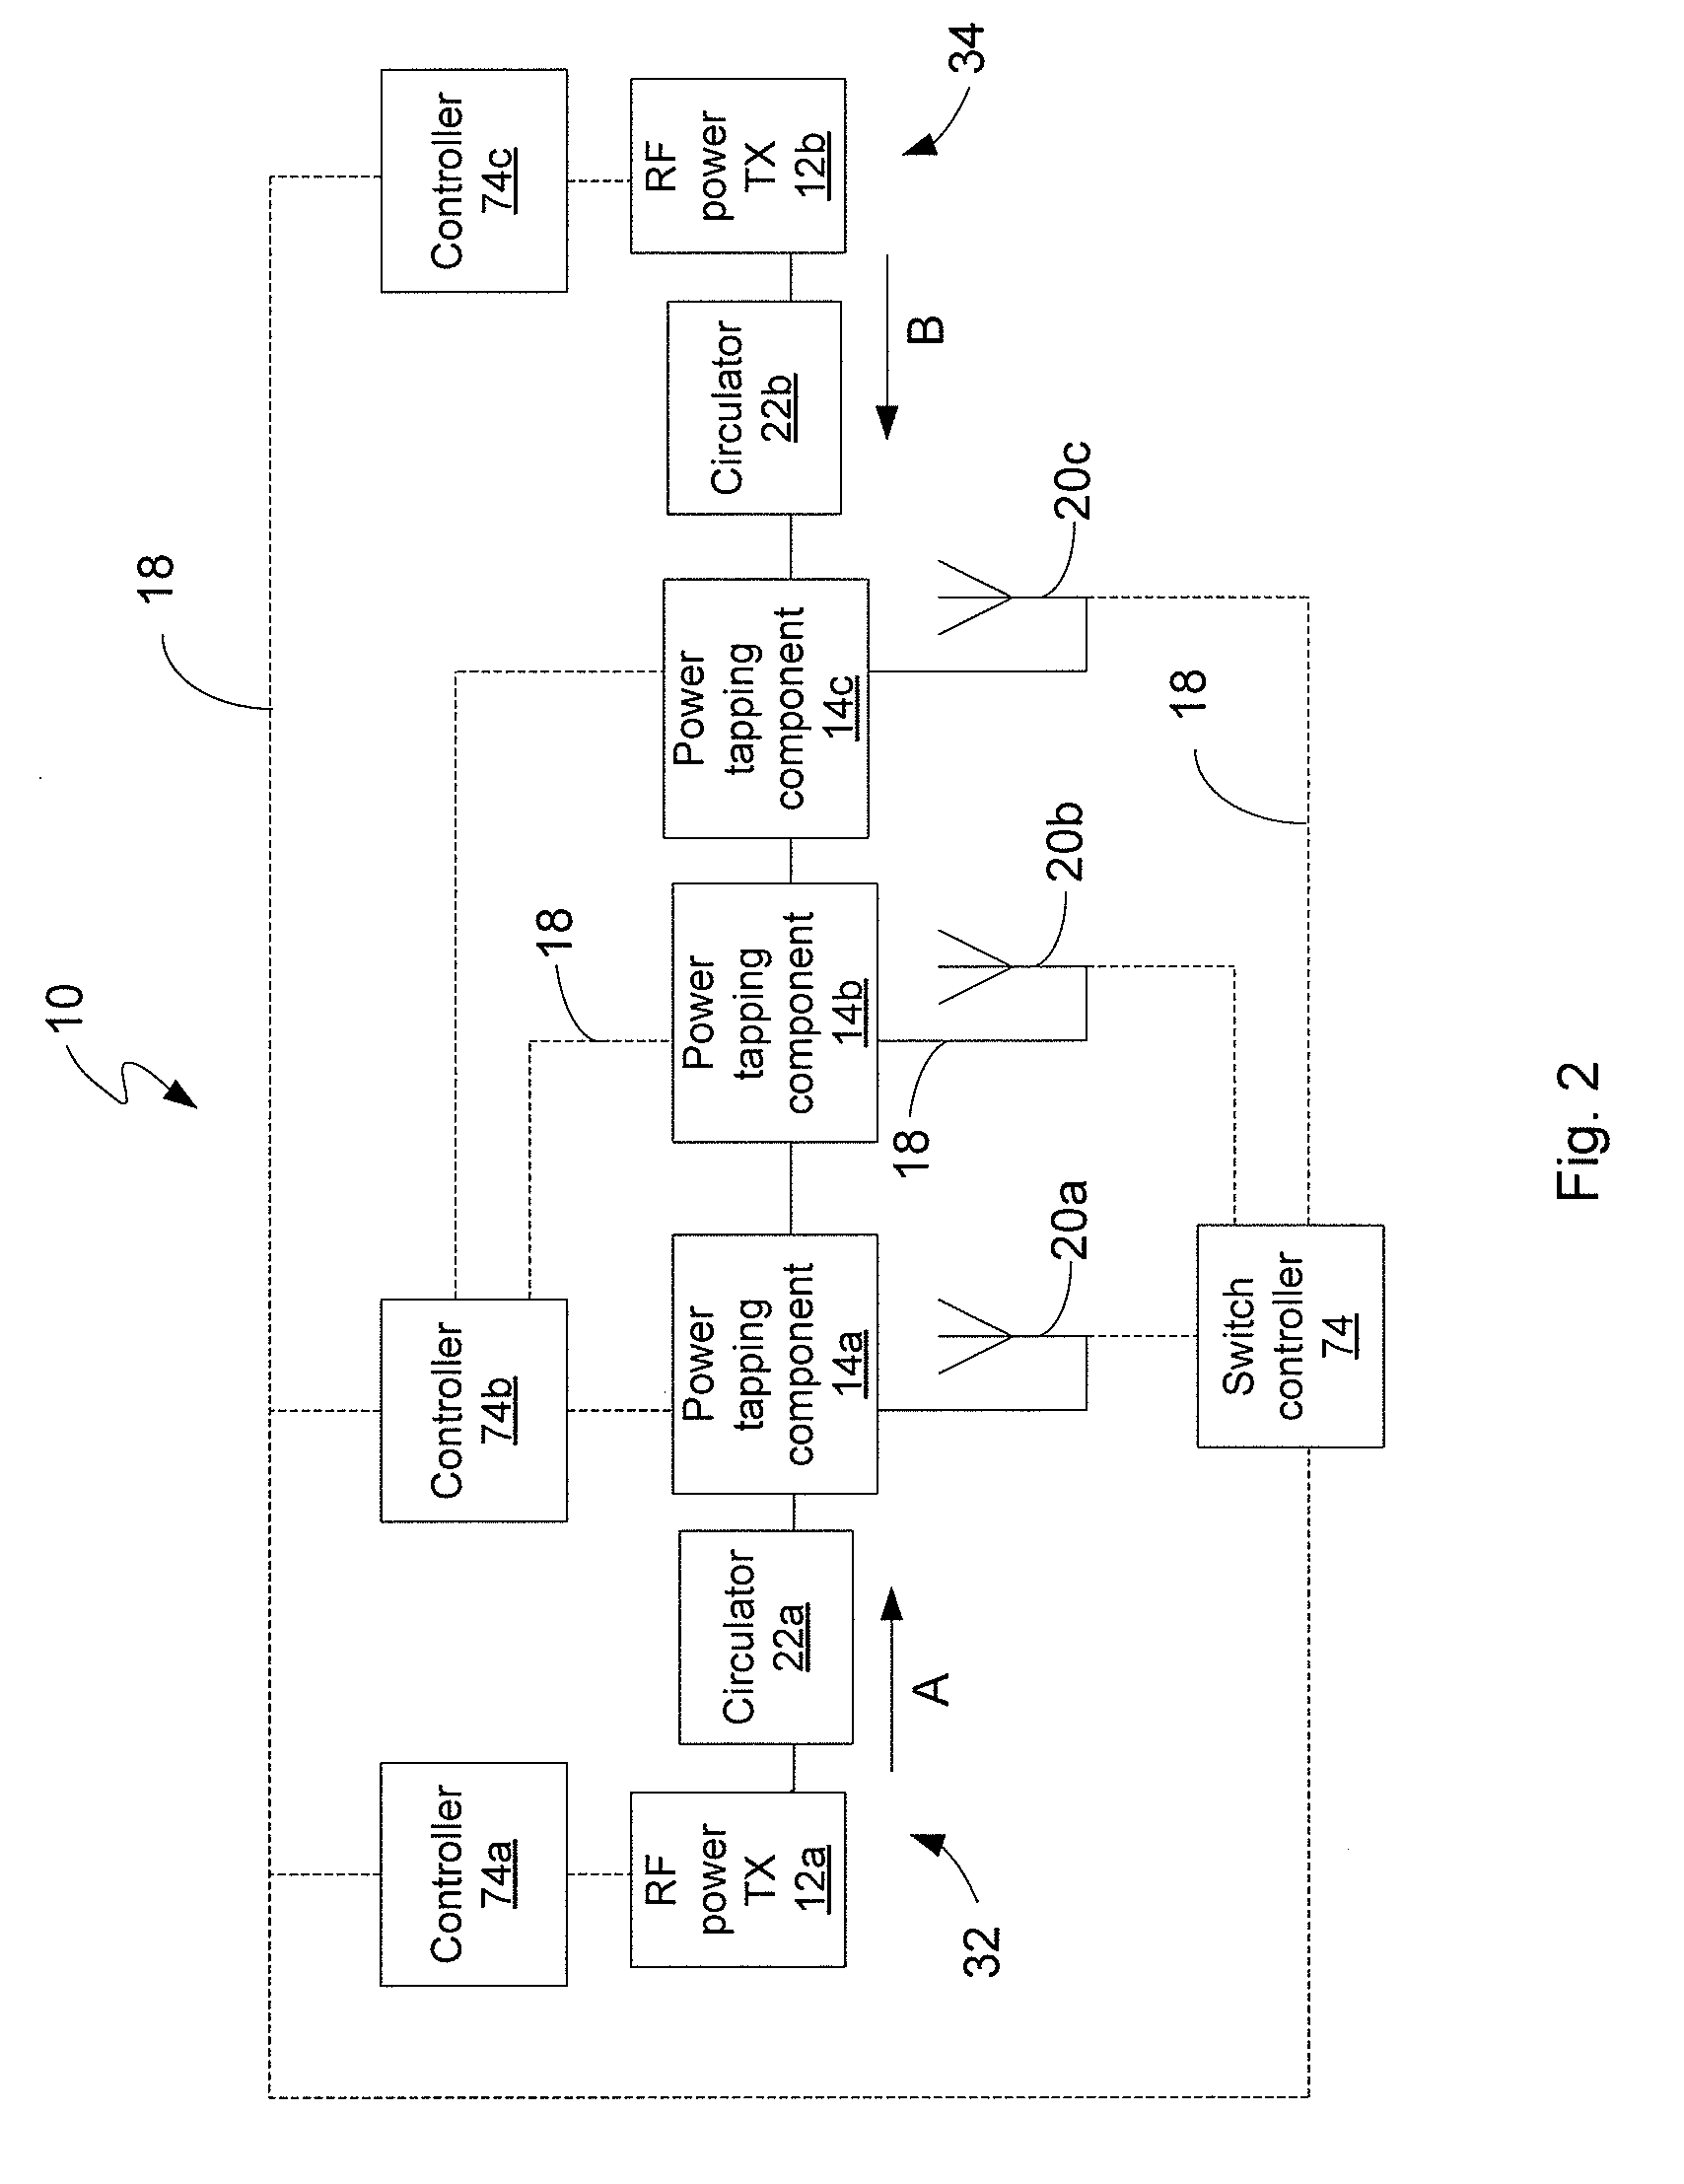 RF power transmission network and method